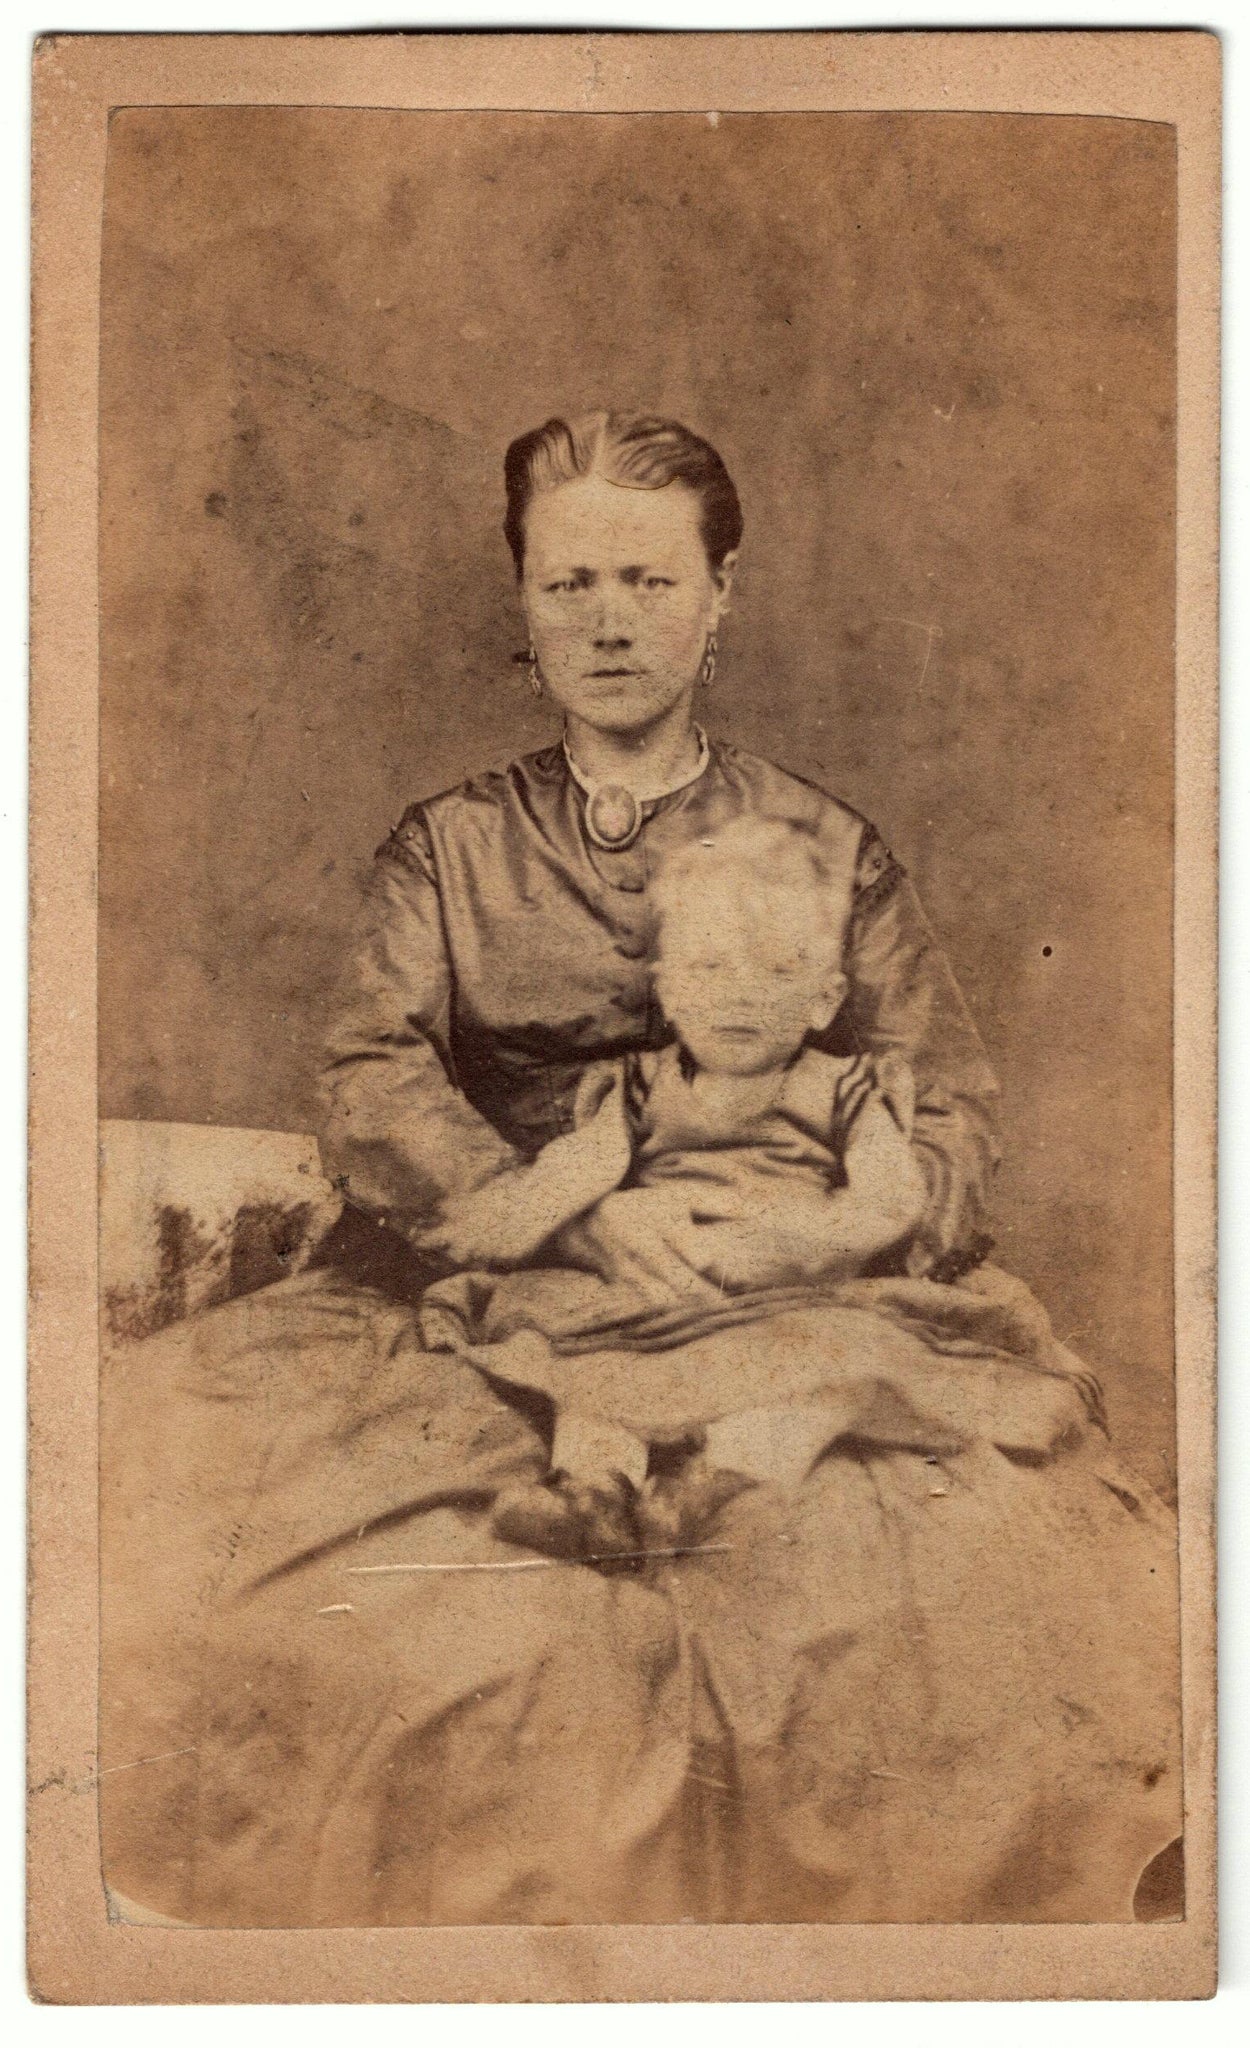 Photograph of a woman & child